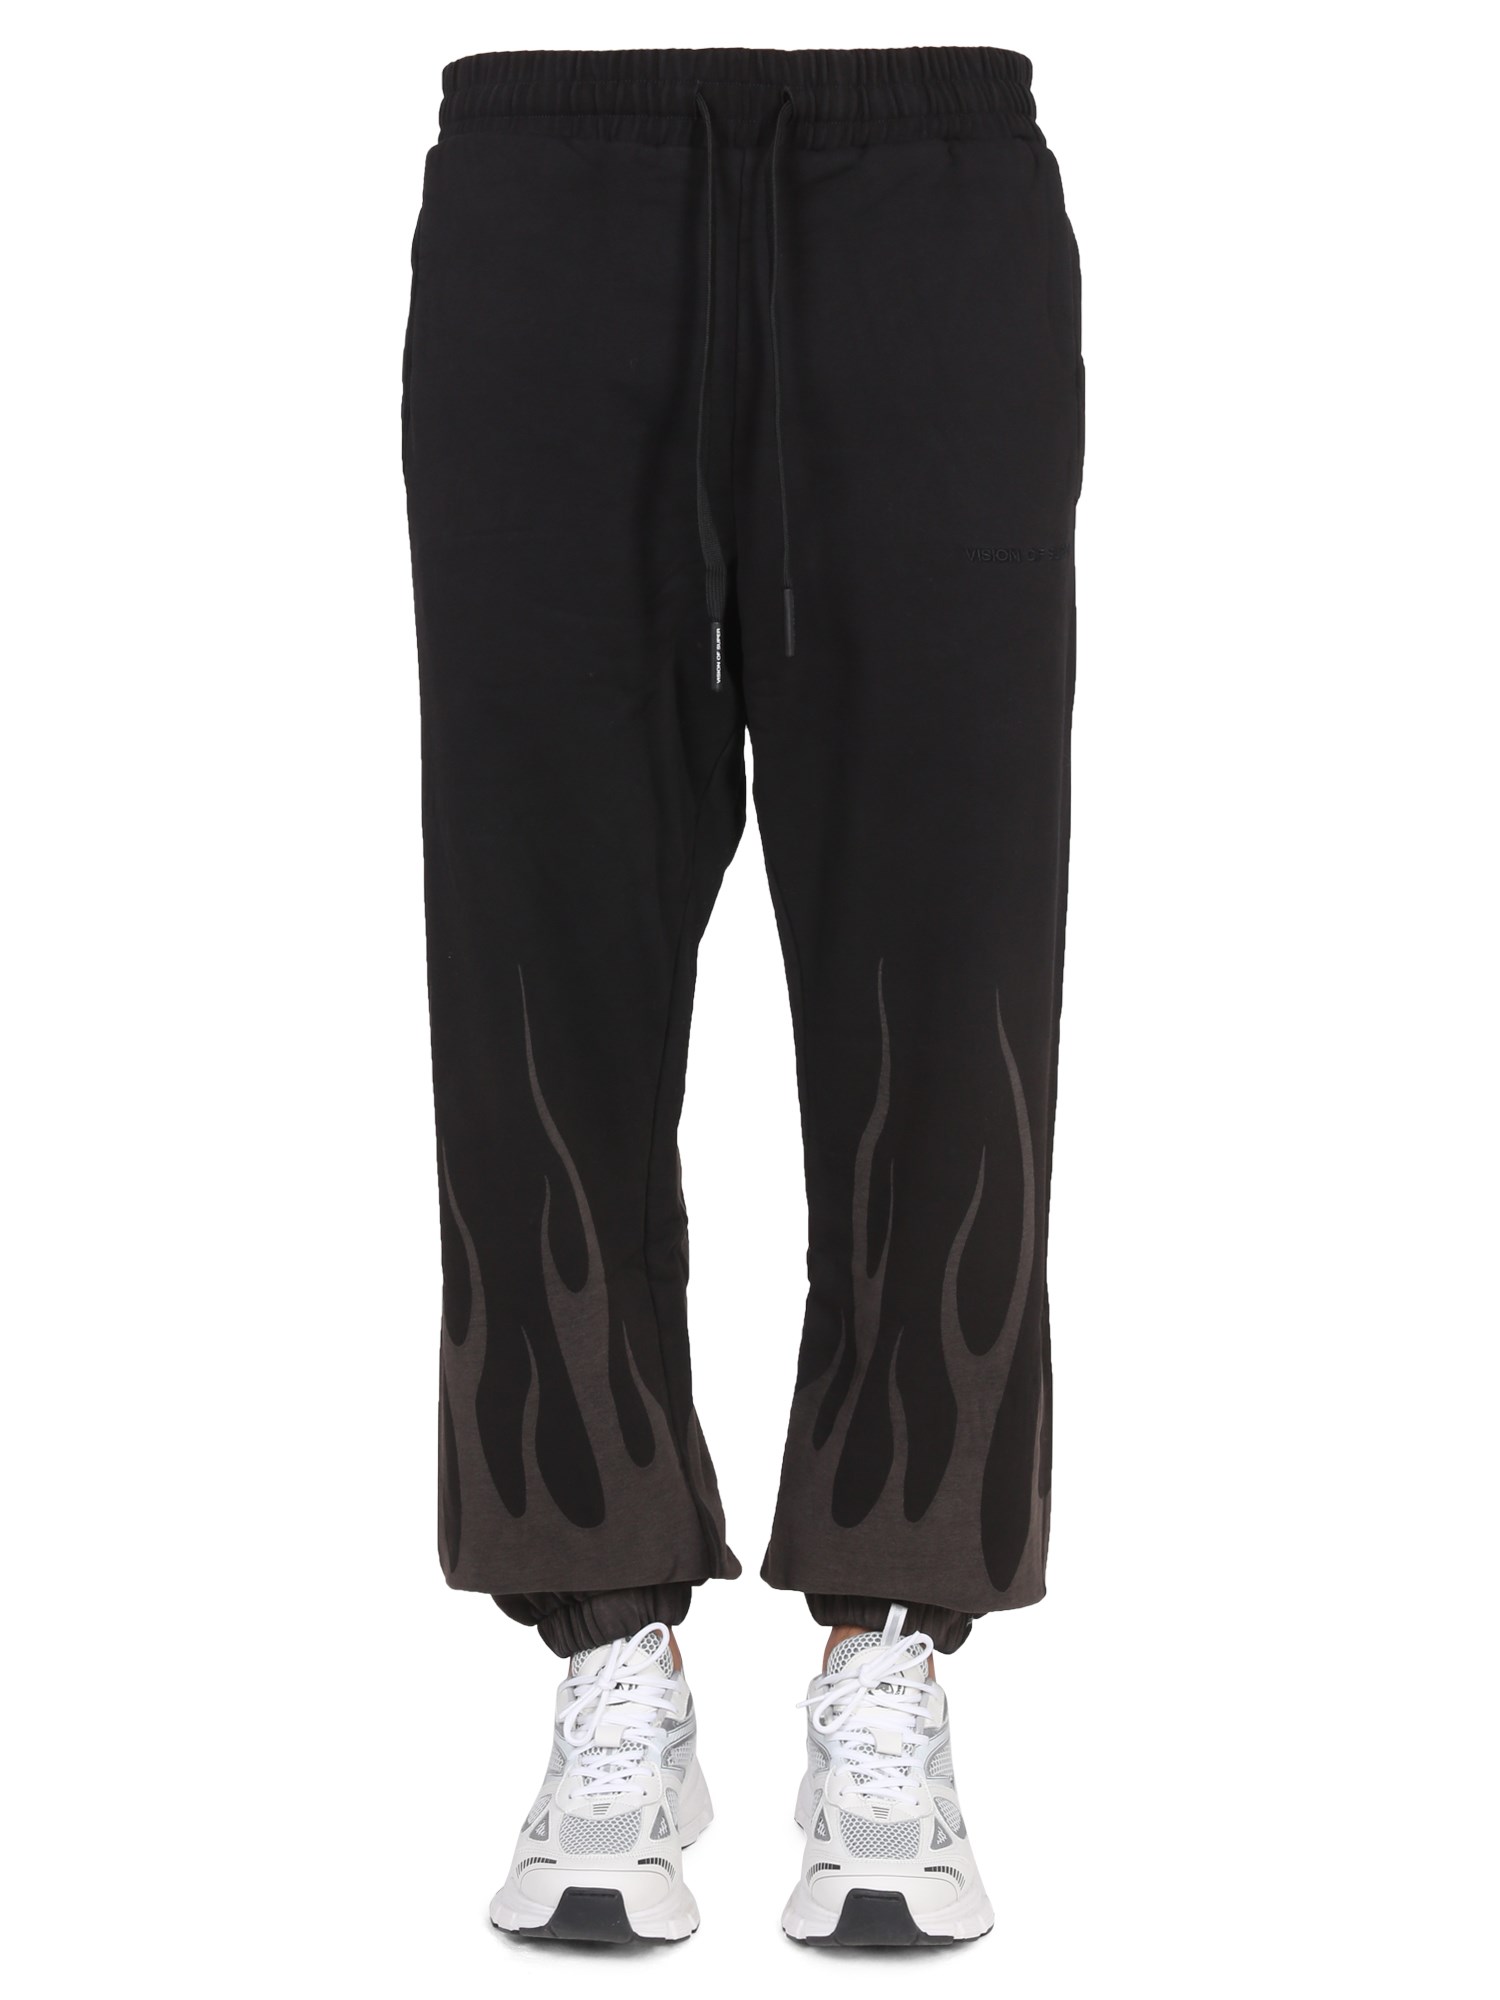 VISION OF SUPER CORROSIVE FLAMES JOGGING trousers